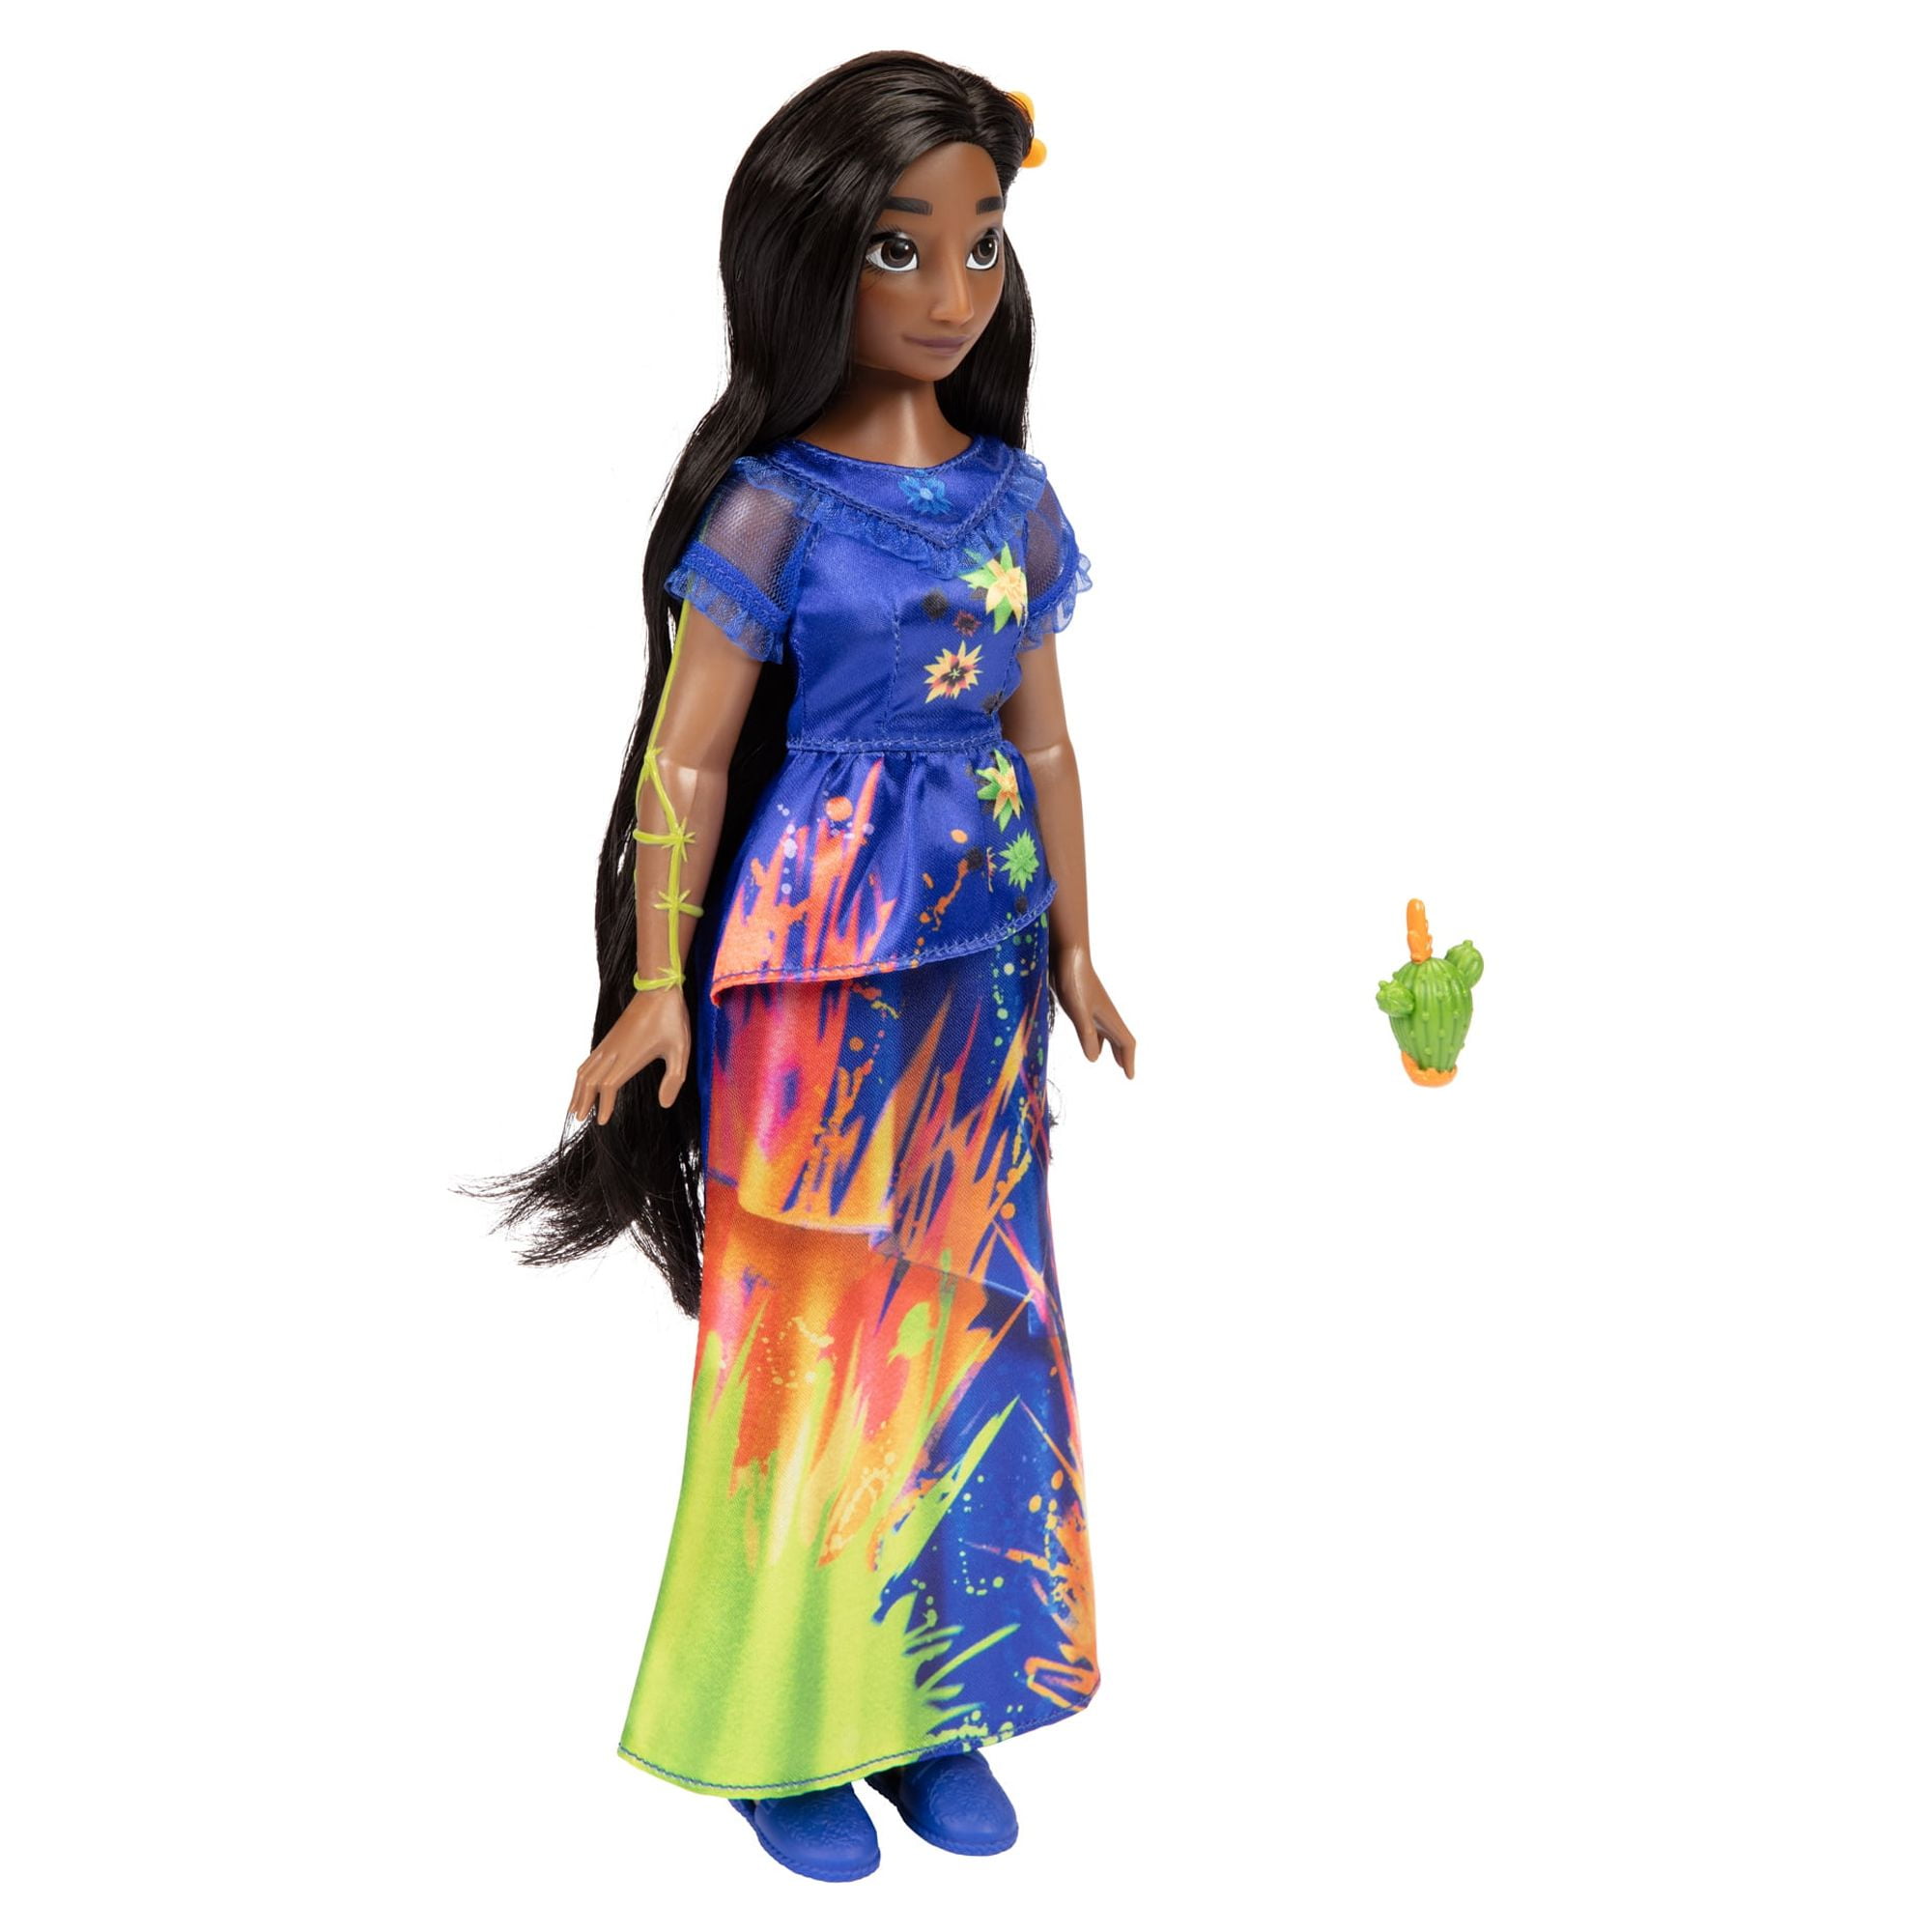 Disney's Encanto Isabela 11 inch Singing Feature Fashion Doll for